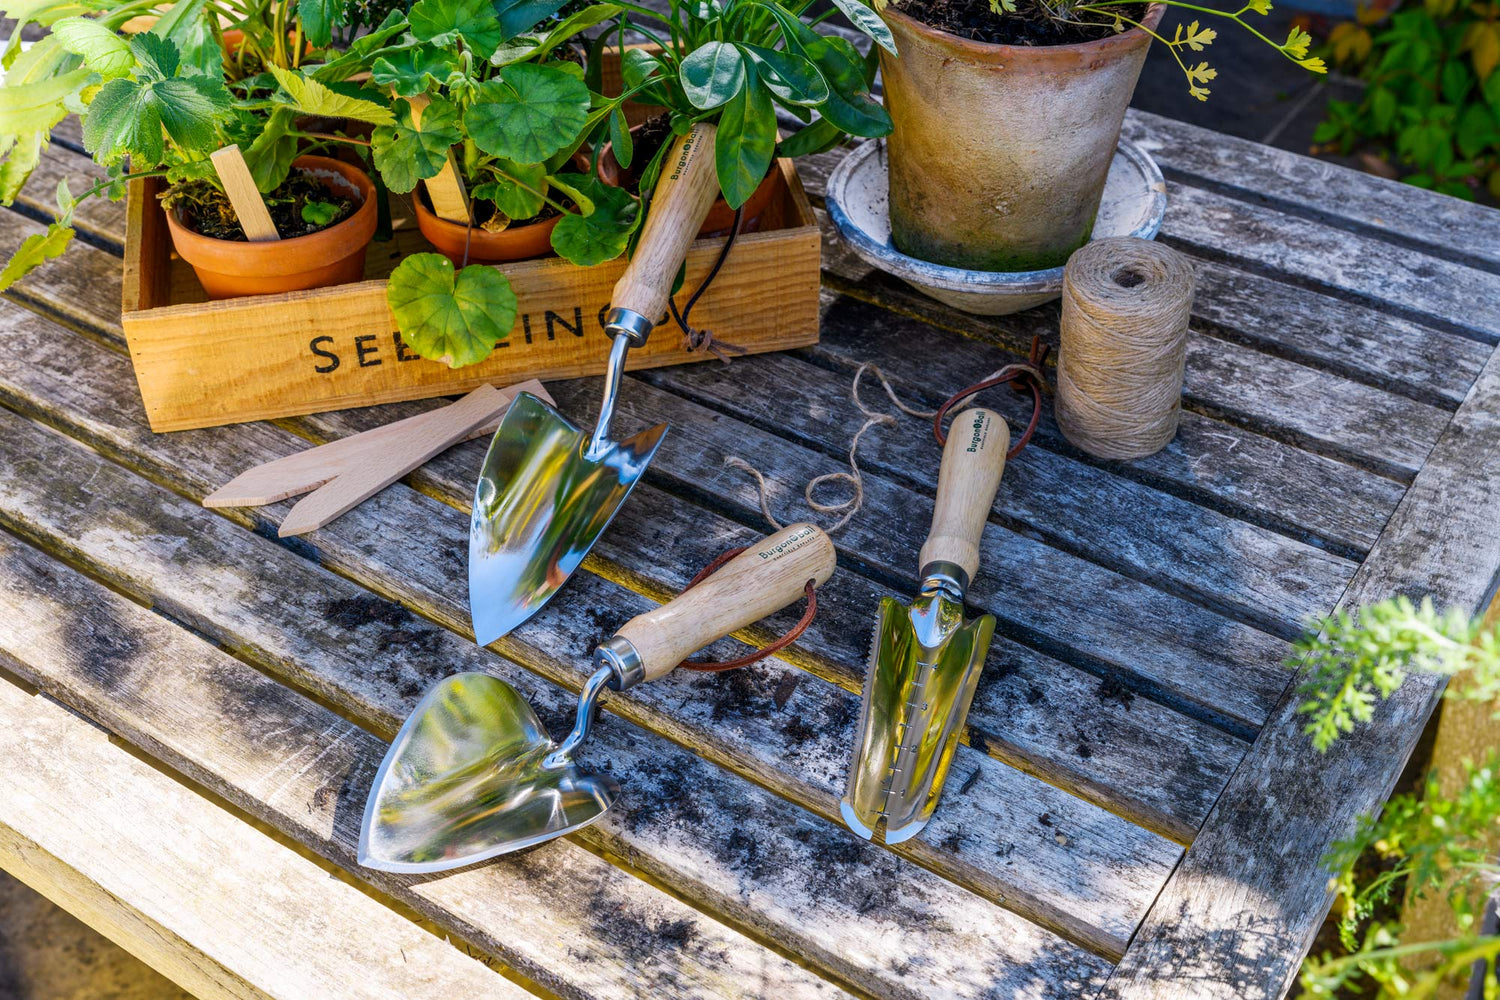 Tools and garden accessories from Barnsdale Gardens header image: hand trowels, wooden labels, string and a box of plants on a wooden table.